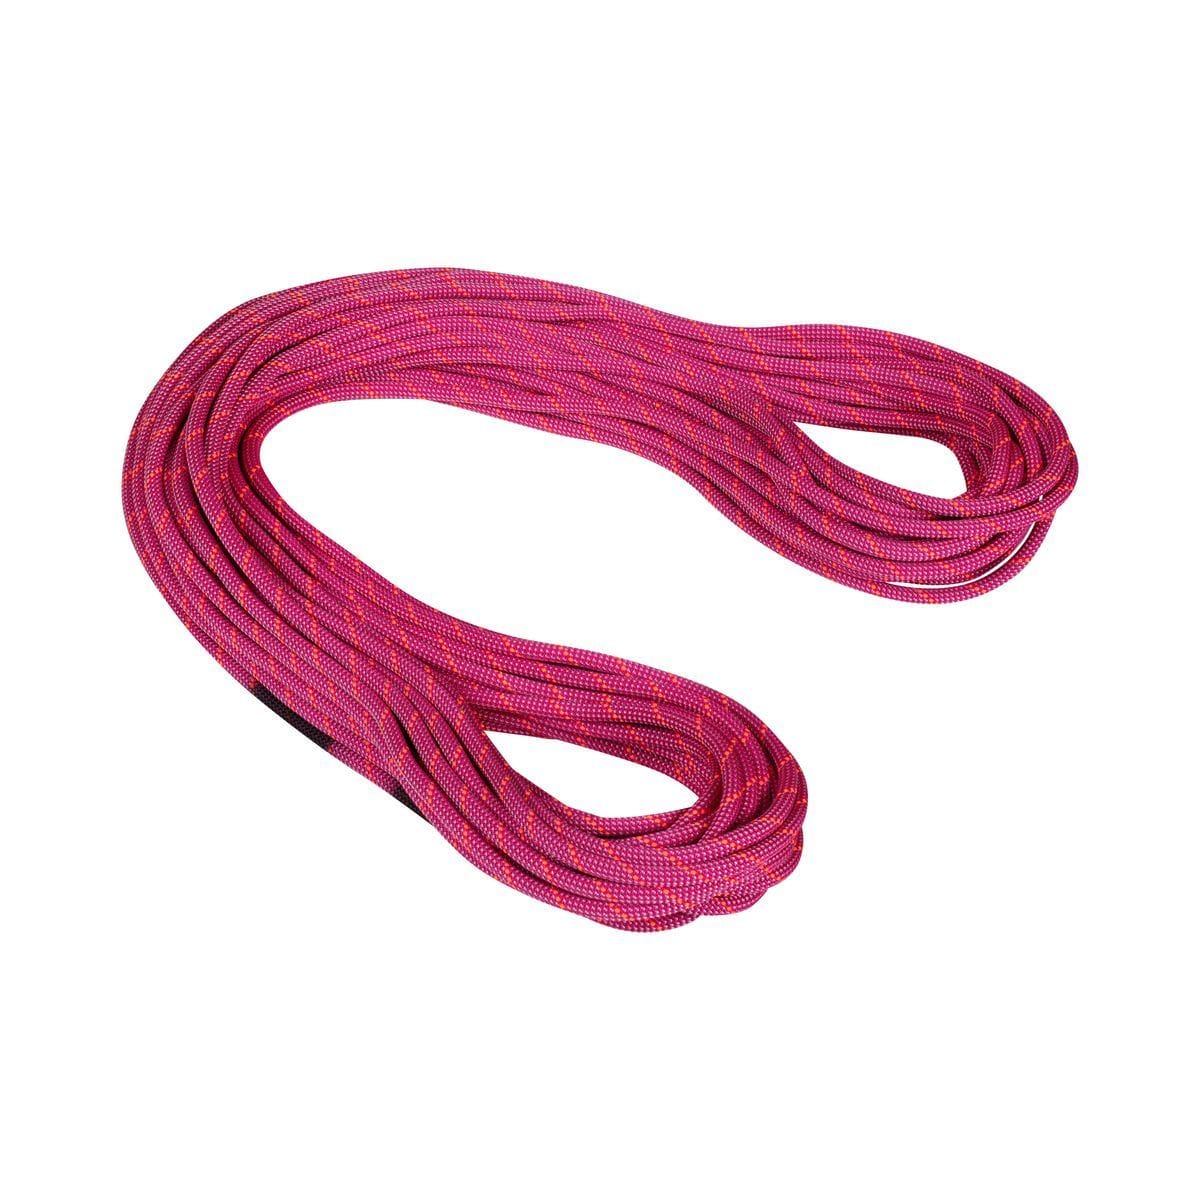 Mammut Climbing Rope 9.5 Crag Dry Rope 30 M / Dry Standard - Pink-Zen - Oz Backcountry